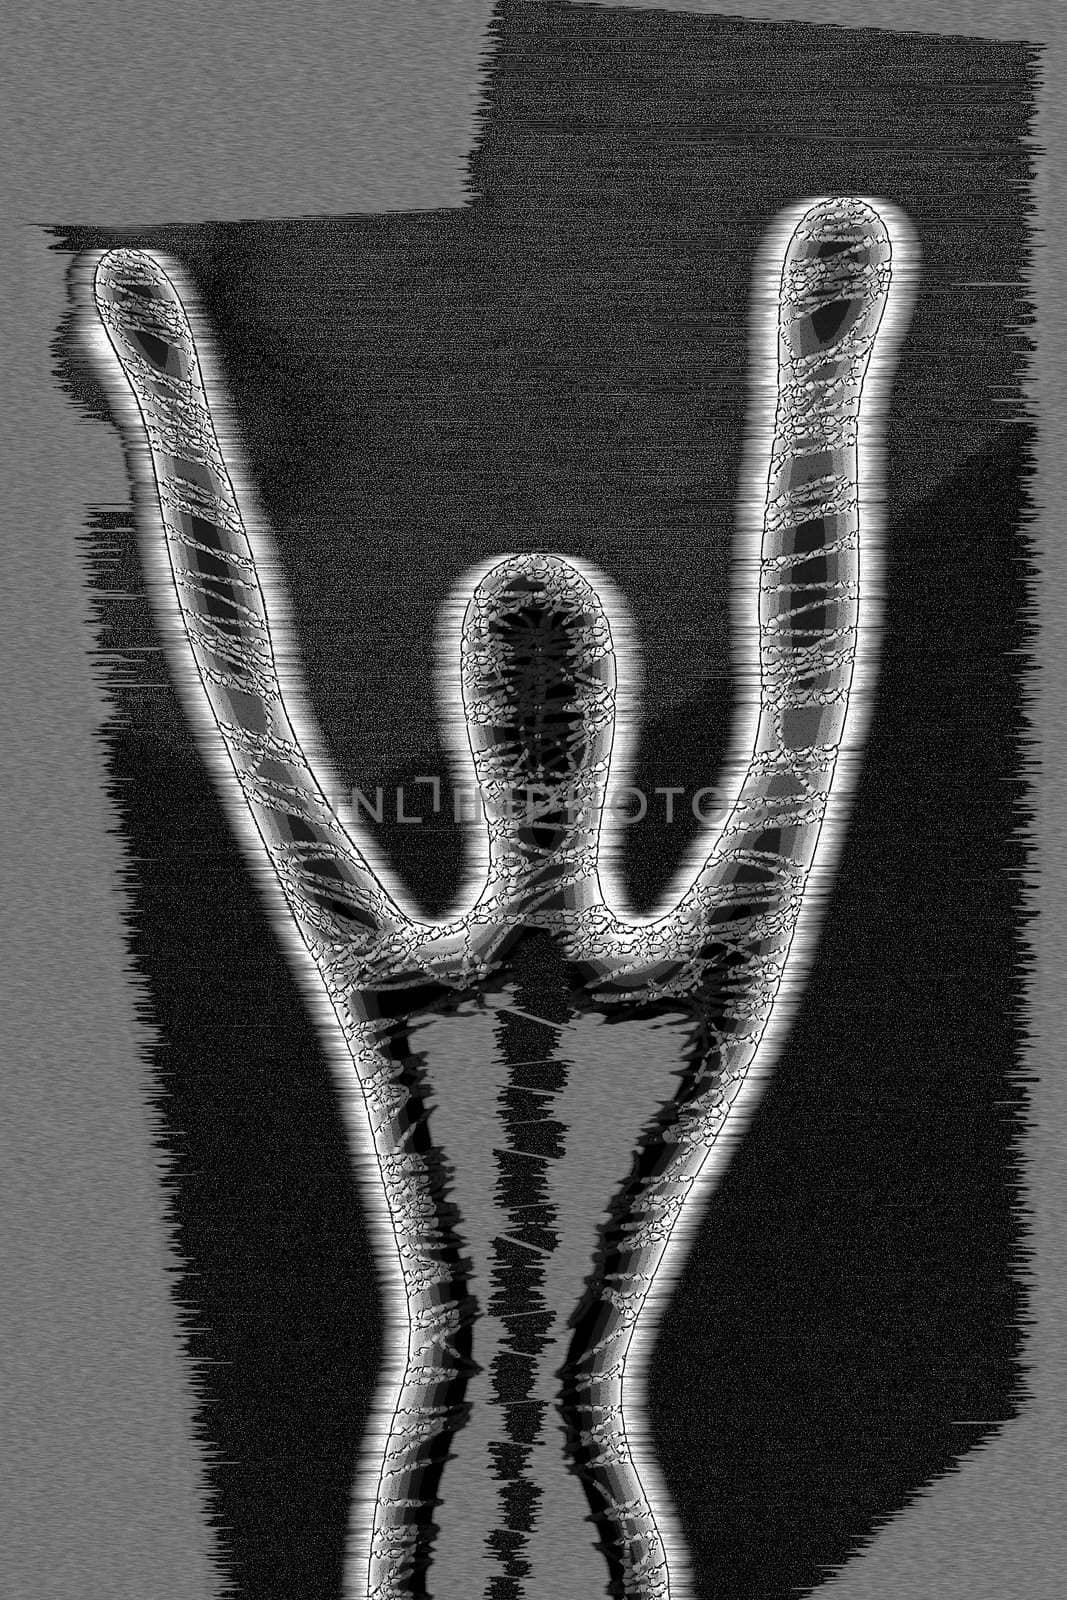 Abstract shadow person with spine highlighted